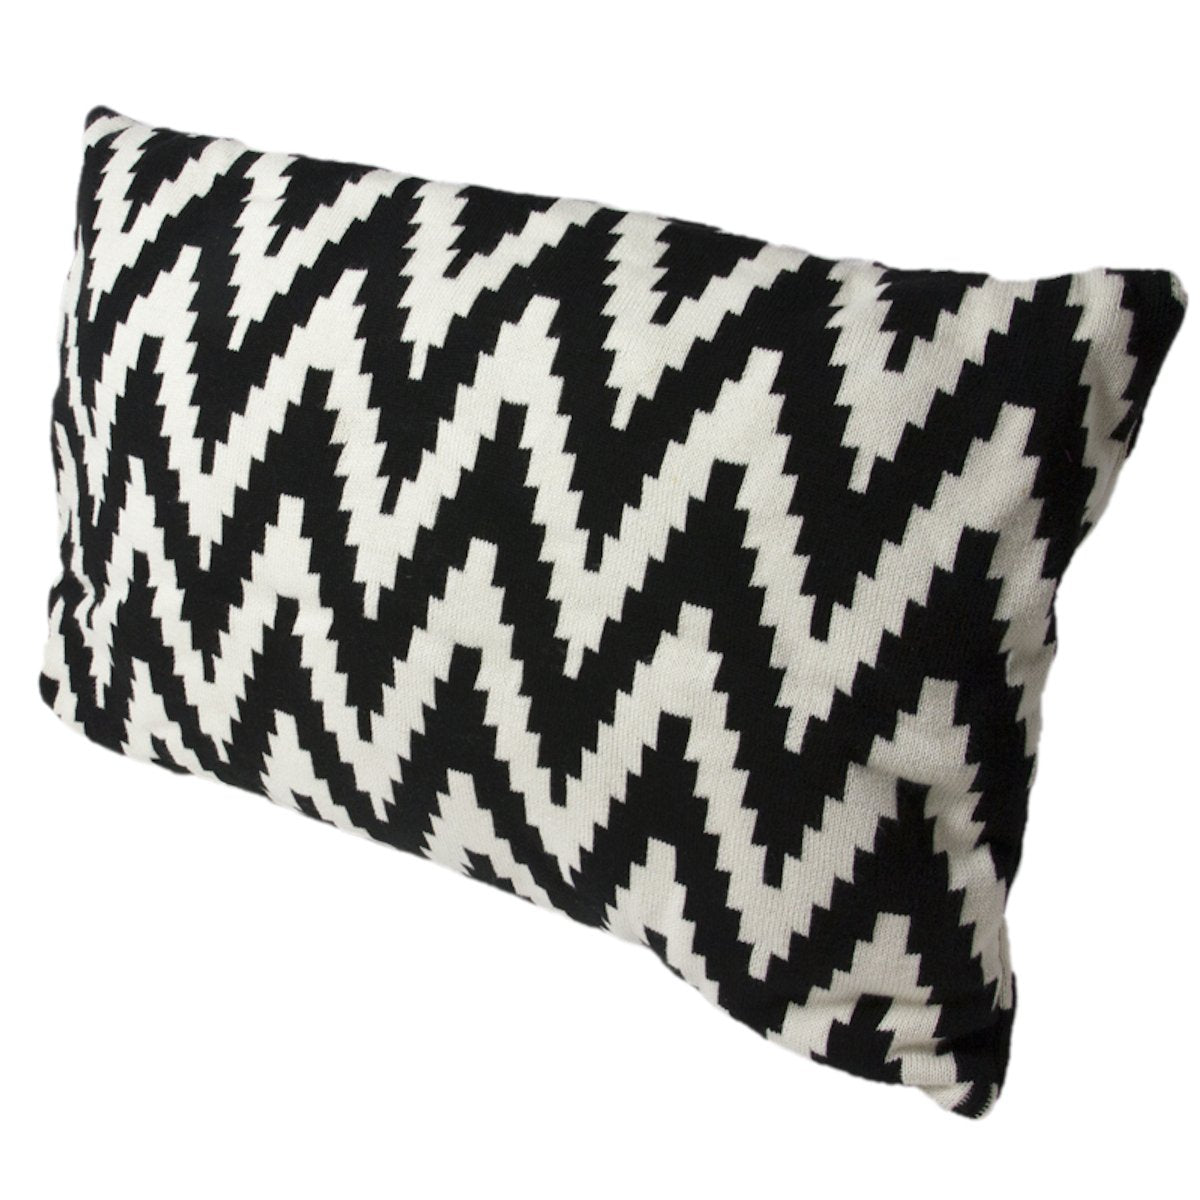 Designer Cushion with integrated Eco Hot Water Bottle -Knitted Cover- Lissabon